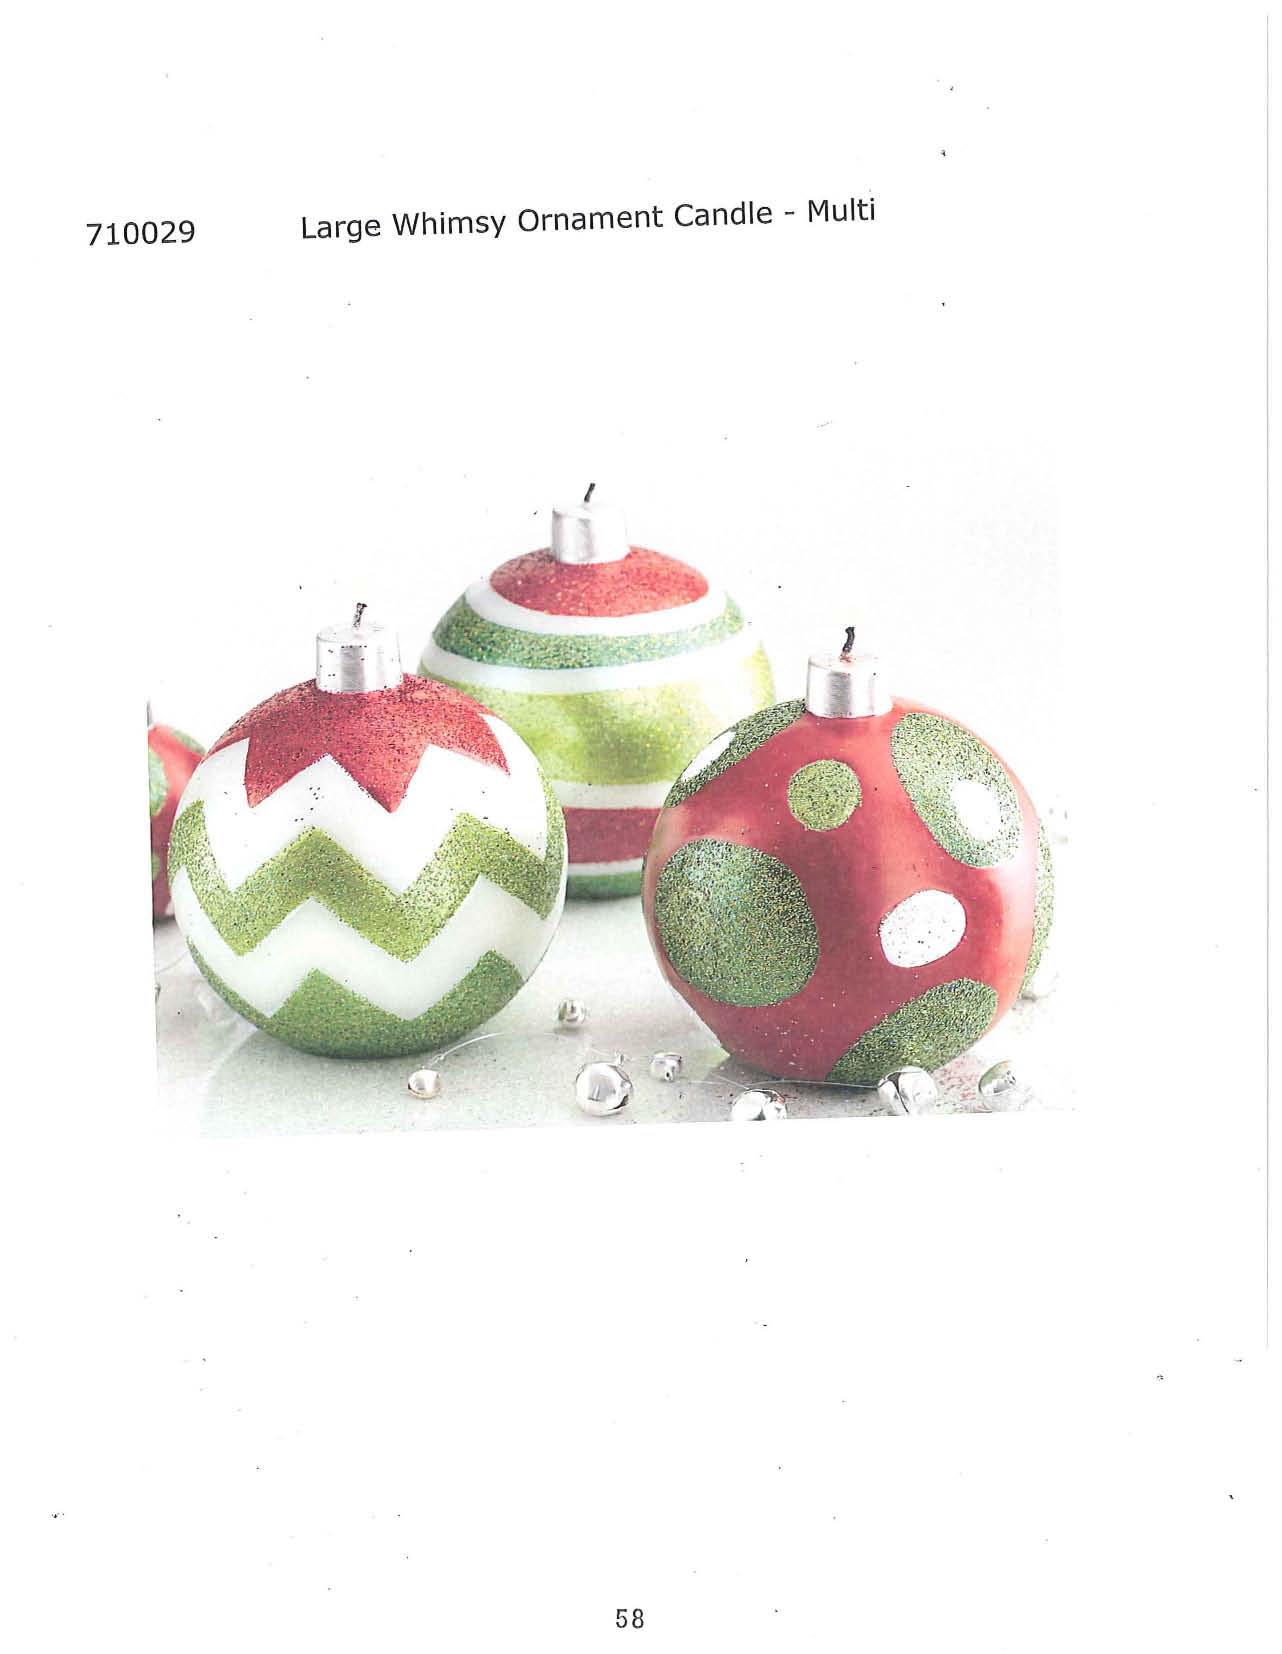 Large Whimsy Ornament Candle - Multi